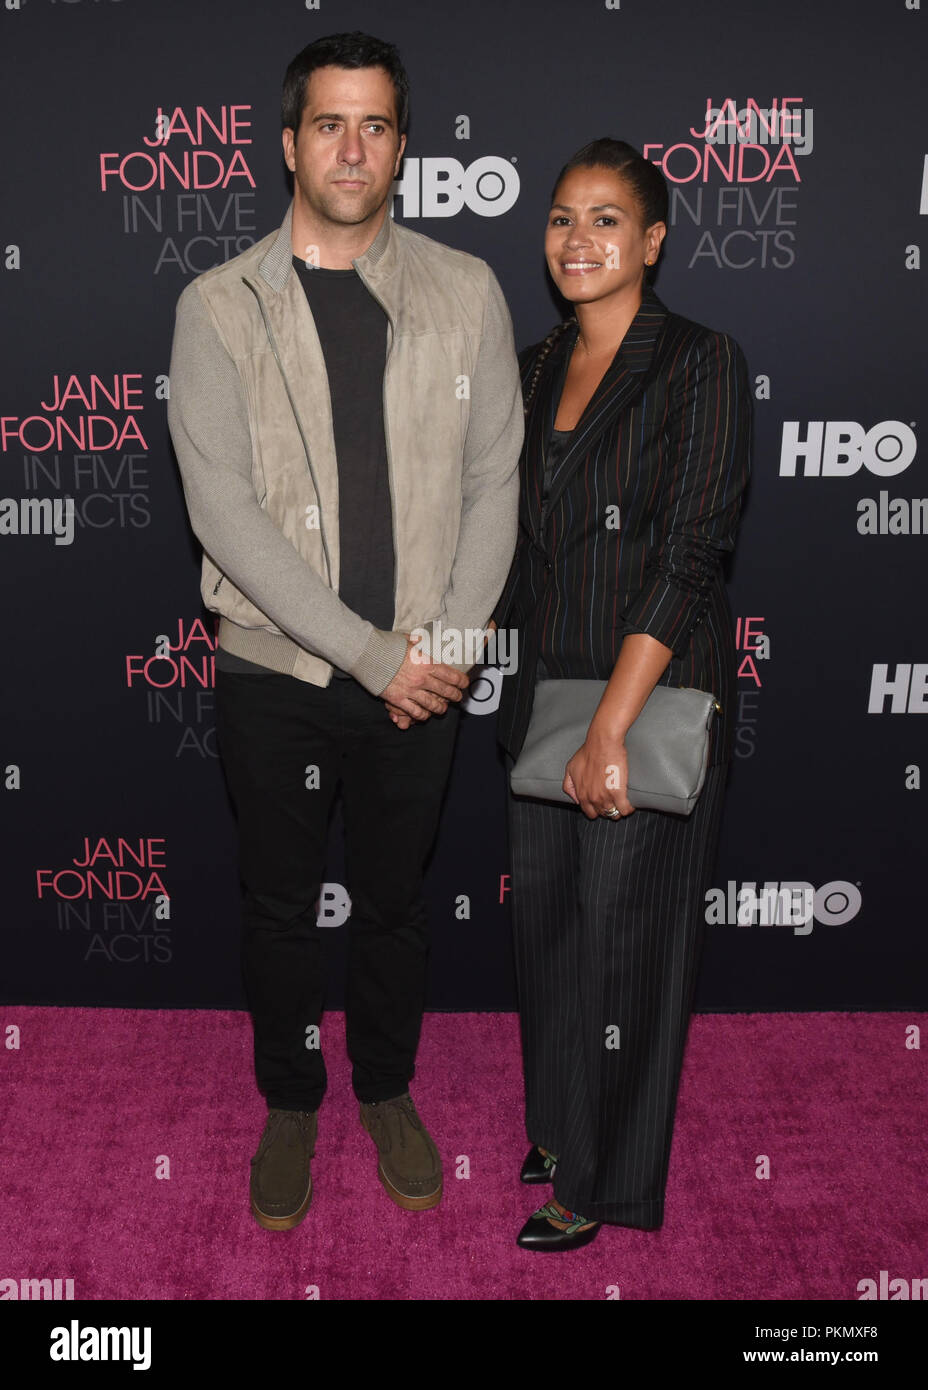 Westwood Village, USA. 13th Sep, 2018. Troy Garity and Simone Bent attends the Los Angeles premiere of HBO's 'Jane Fonda in Five Acts' at the Hammer Museum in Westwood Village, California on September 13, 2018. Credit: The Photo Access/Alamy Live News Stock Photo